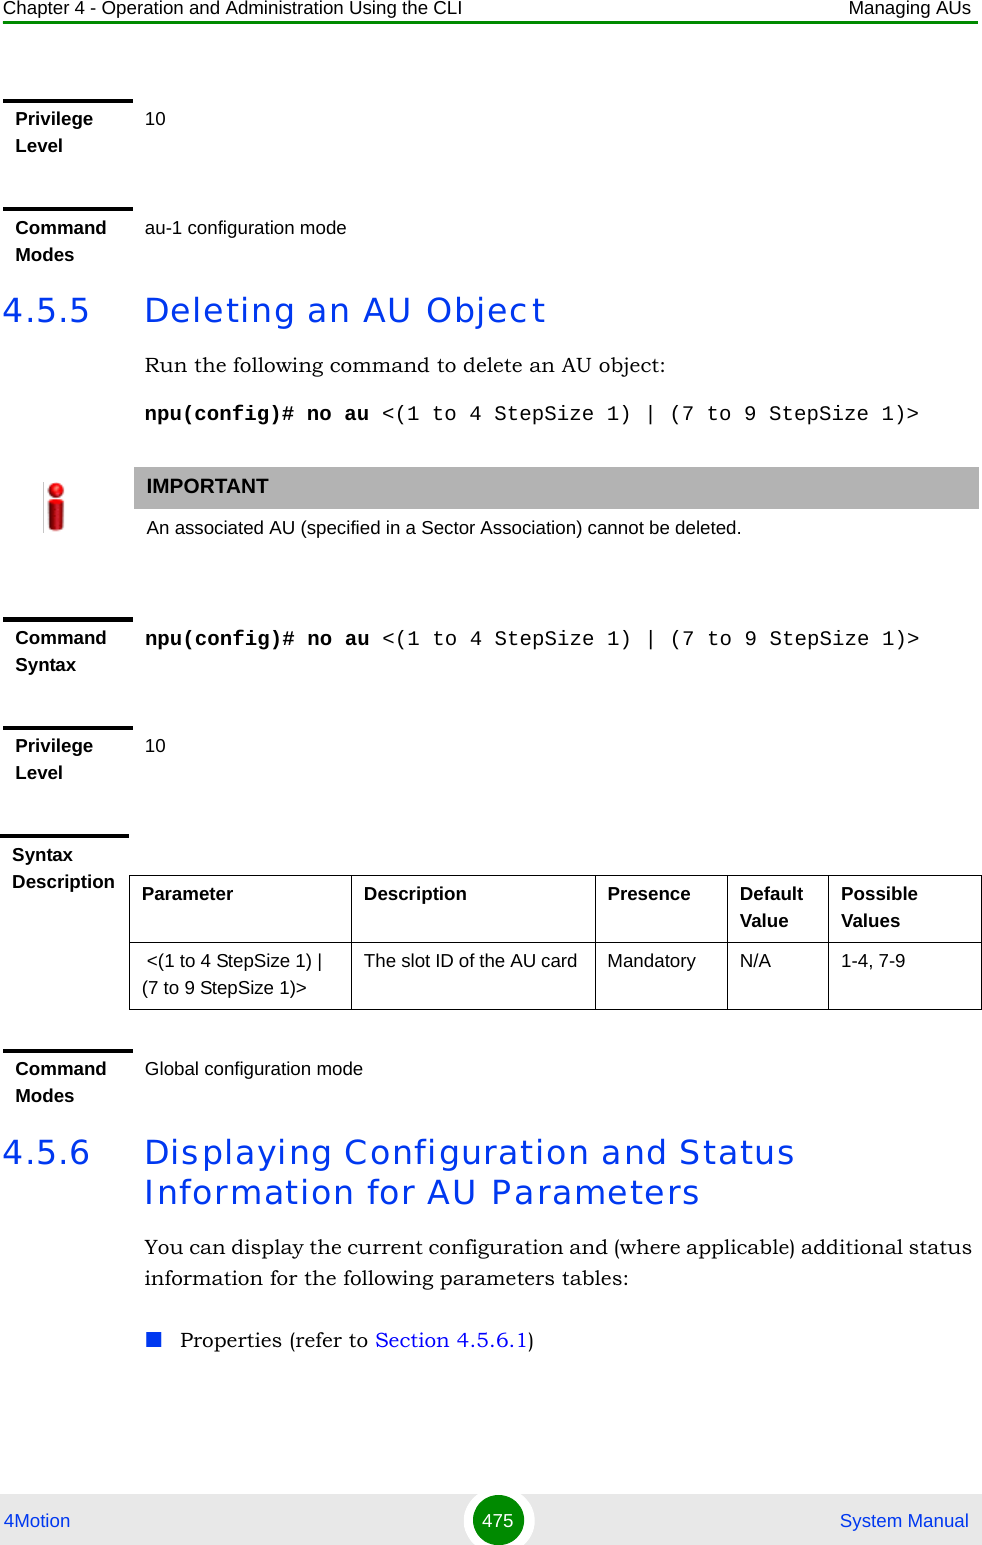 Chapter 4 - Operation and Administration Using the CLI Managing AUs4Motion 475  System Manual4.5.5 Deleting an AU ObjectRun the following command to delete an AU object:npu(config)# no au &lt;(1 to 4 StepSize 1) | (7 to 9 StepSize 1)&gt;4.5.6 Displaying Configuration and Status Information for AU ParametersYou can display the current configuration and (where applicable) additional status information for the following parameters tables:Properties (refer to Section 4.5.6.1)Privilege Level10Command Modesau-1 configuration modeIMPORTANTAn associated AU (specified in a Sector Association) cannot be deleted.Command Syntaxnpu(config)# no au &lt;(1 to 4 StepSize 1) | (7 to 9 StepSize 1)&gt;Privilege Level10Syntax Description Parameter Description Presence Default ValuePossible Values &lt;(1 to 4 StepSize 1) | (7 to 9 StepSize 1)&gt;The slot ID of the AU card  Mandatory N/A 1-4, 7-9Command ModesGlobal configuration mode